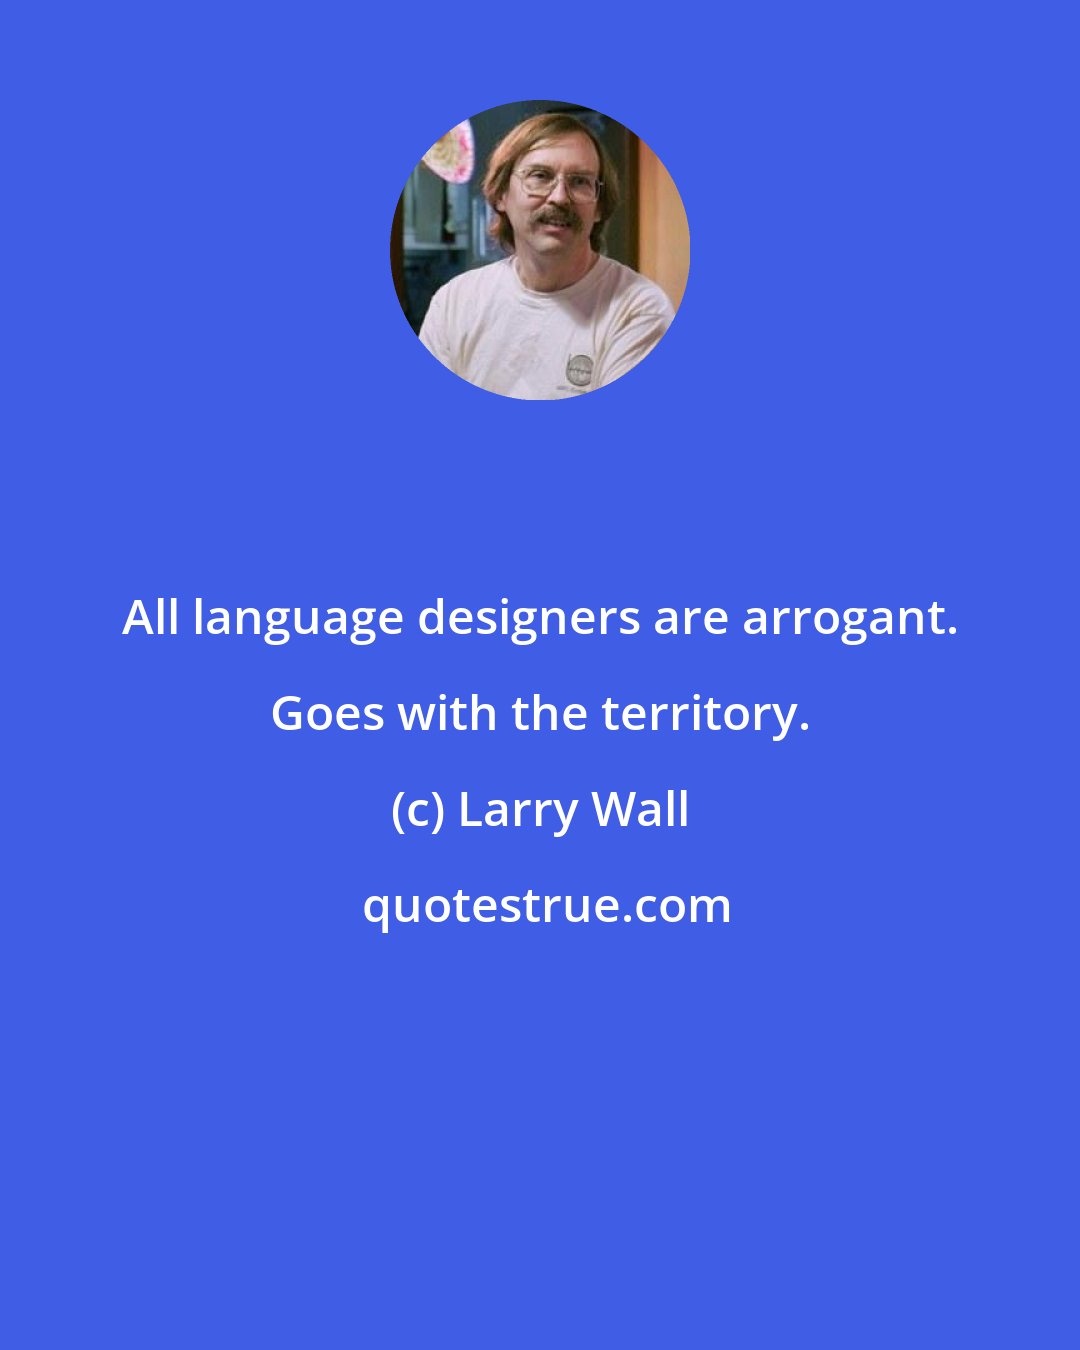 Larry Wall: All language designers are arrogant. Goes with the territory.